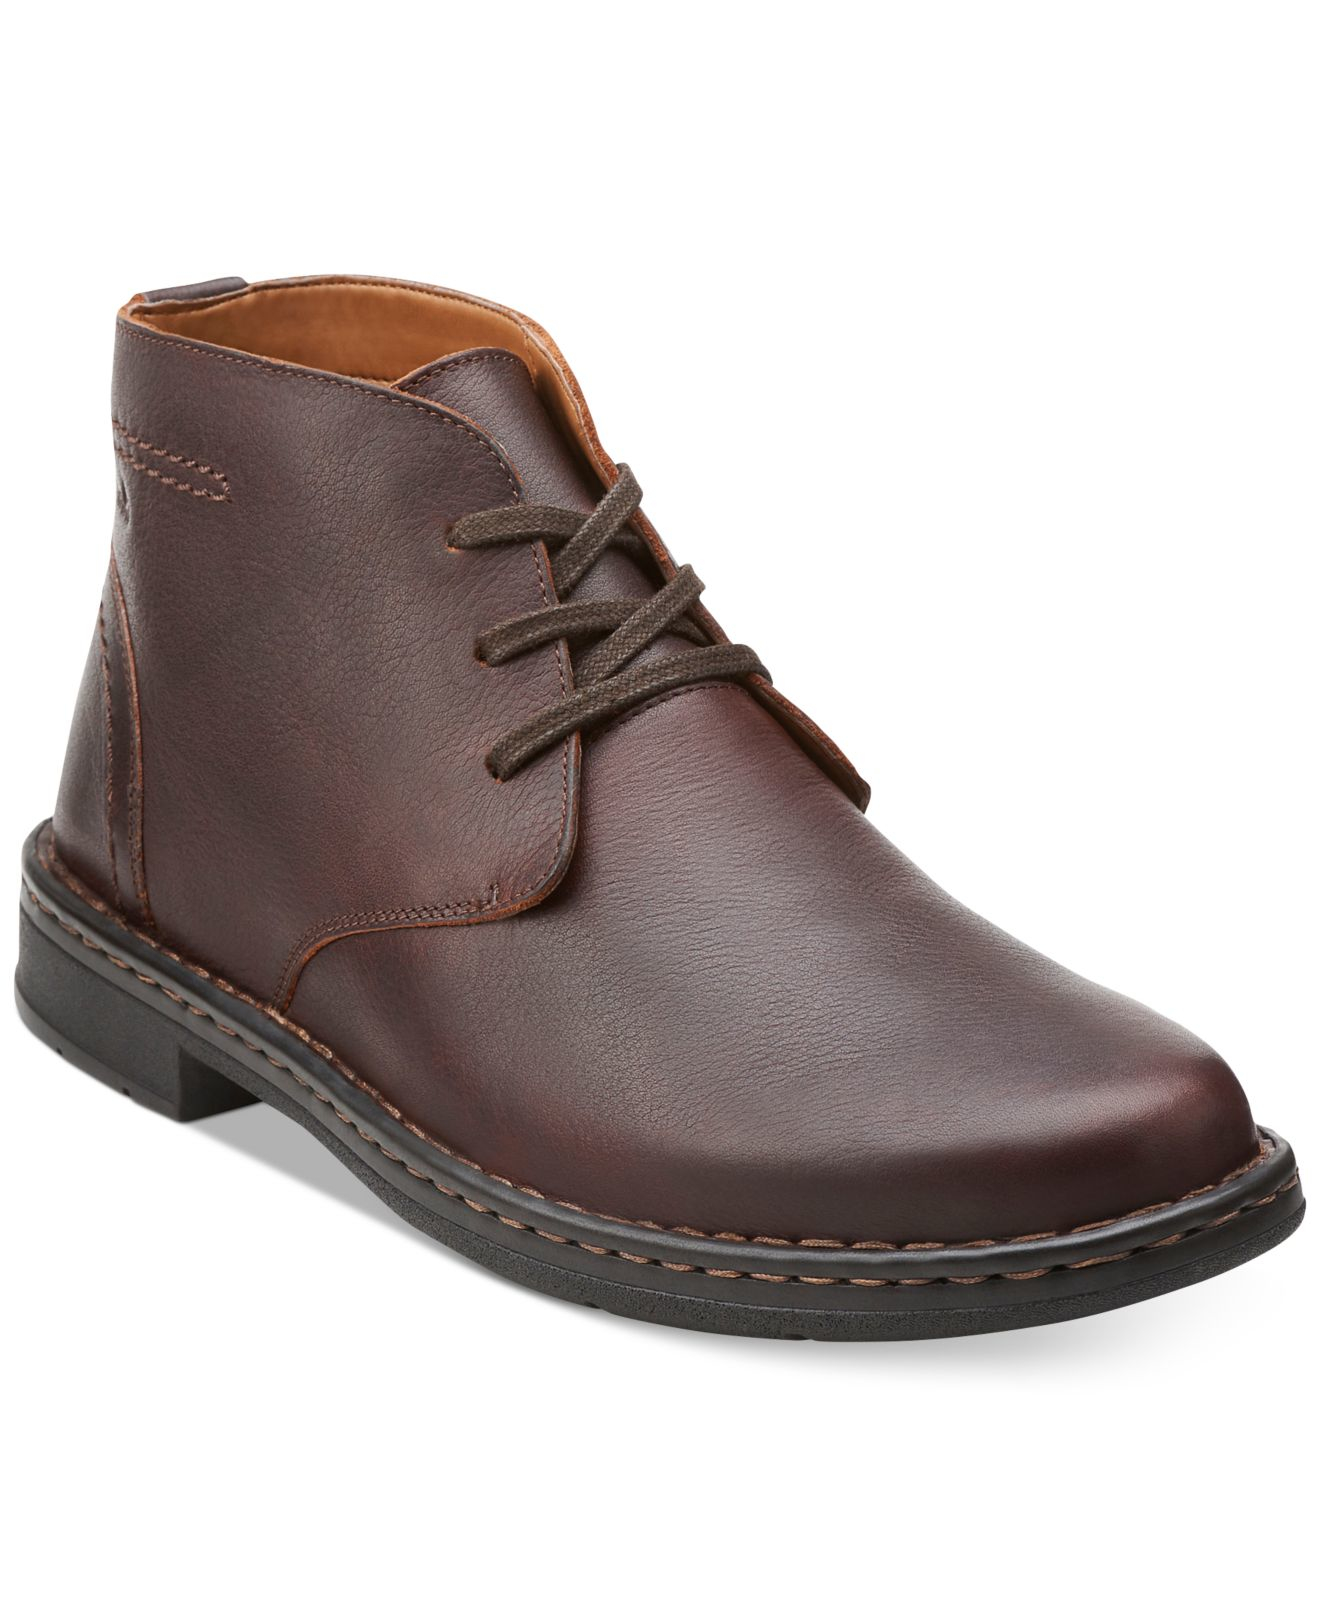 Lyst - Clarks Men's Kyros Limit Chukka Boots in Brown for Men